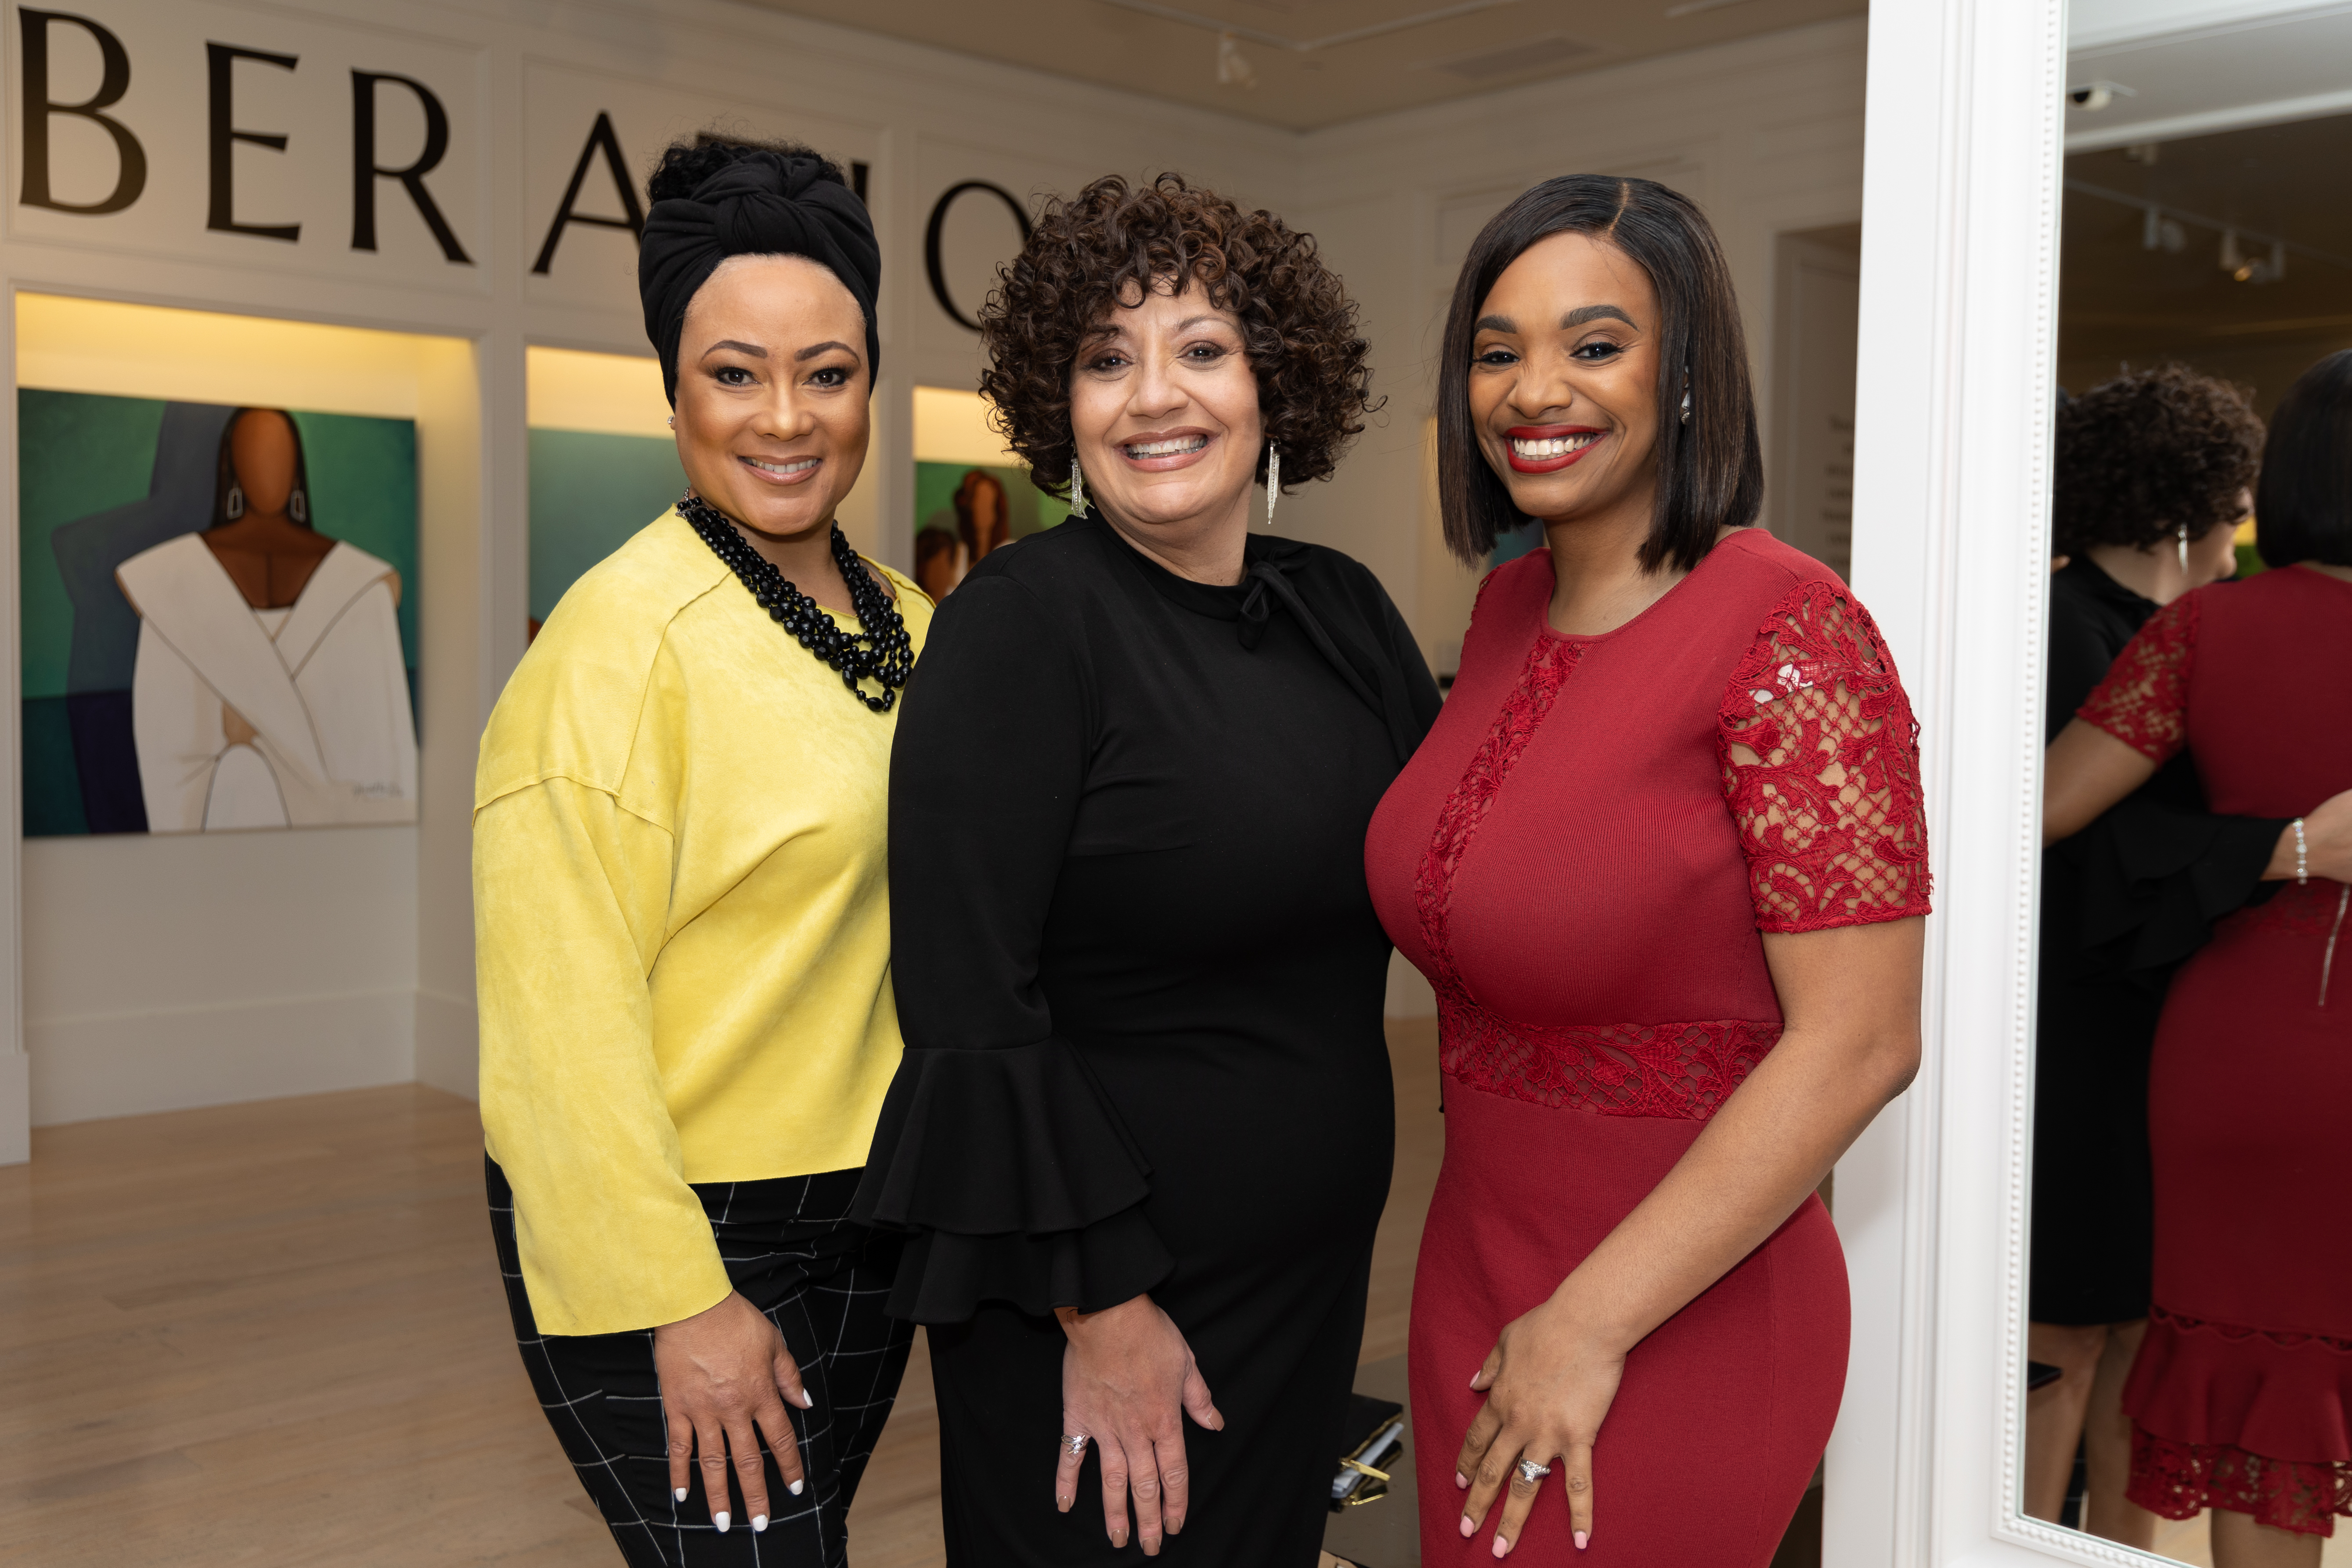 Three black women standing together: one in a black head wrap and yellow top, one with curly hair in a black dress, and one with a straight shoulder-length bob in a red dress.